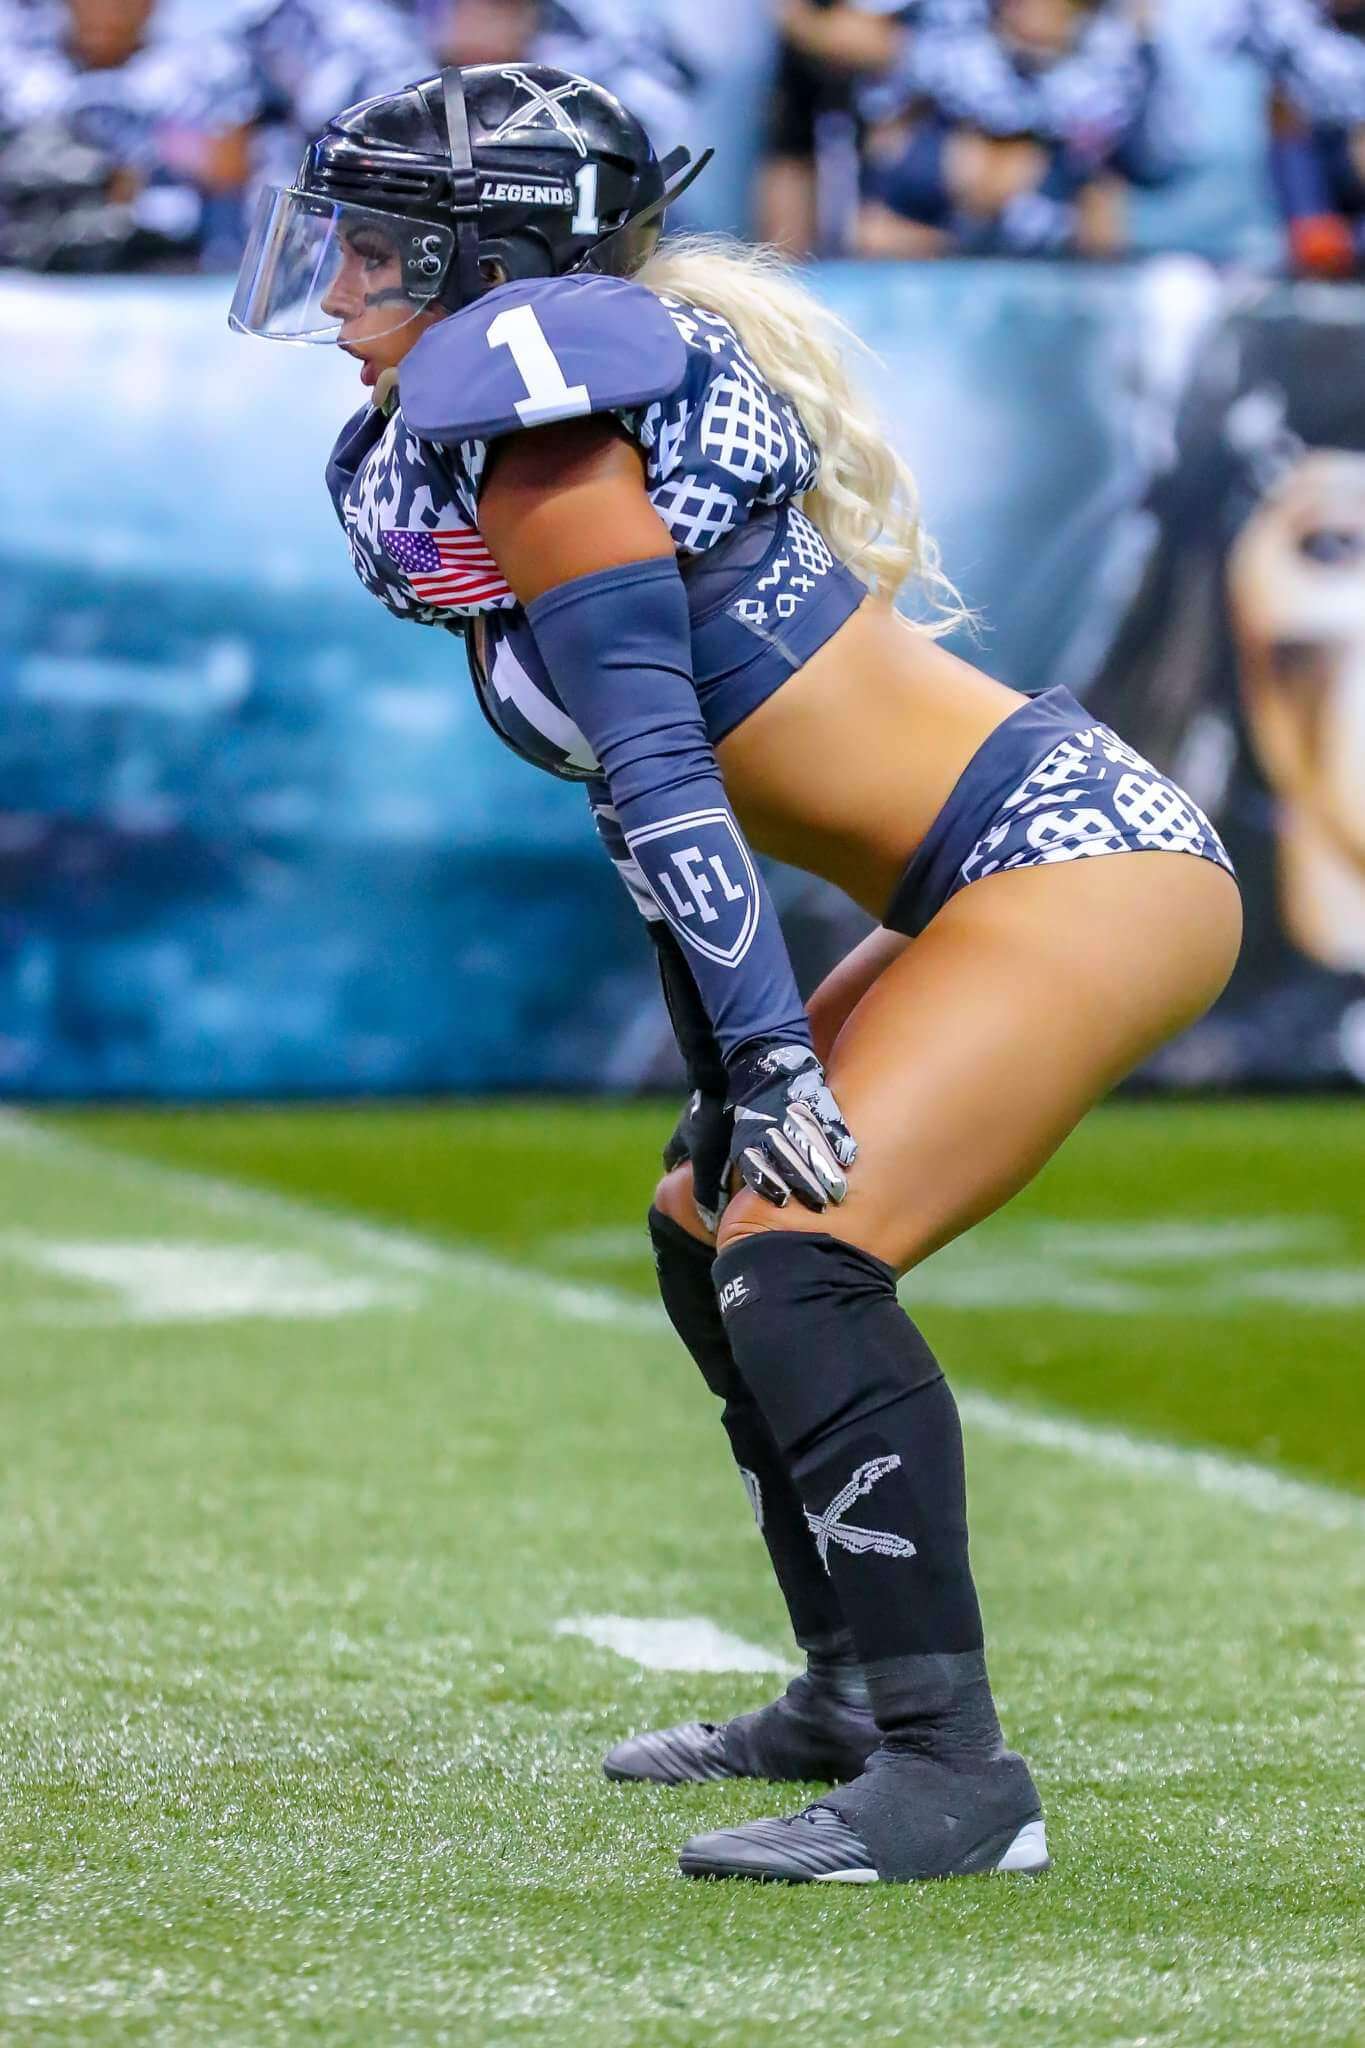 The Legends Football League Beautiful Women And Football, Need We Say Anymore! 52